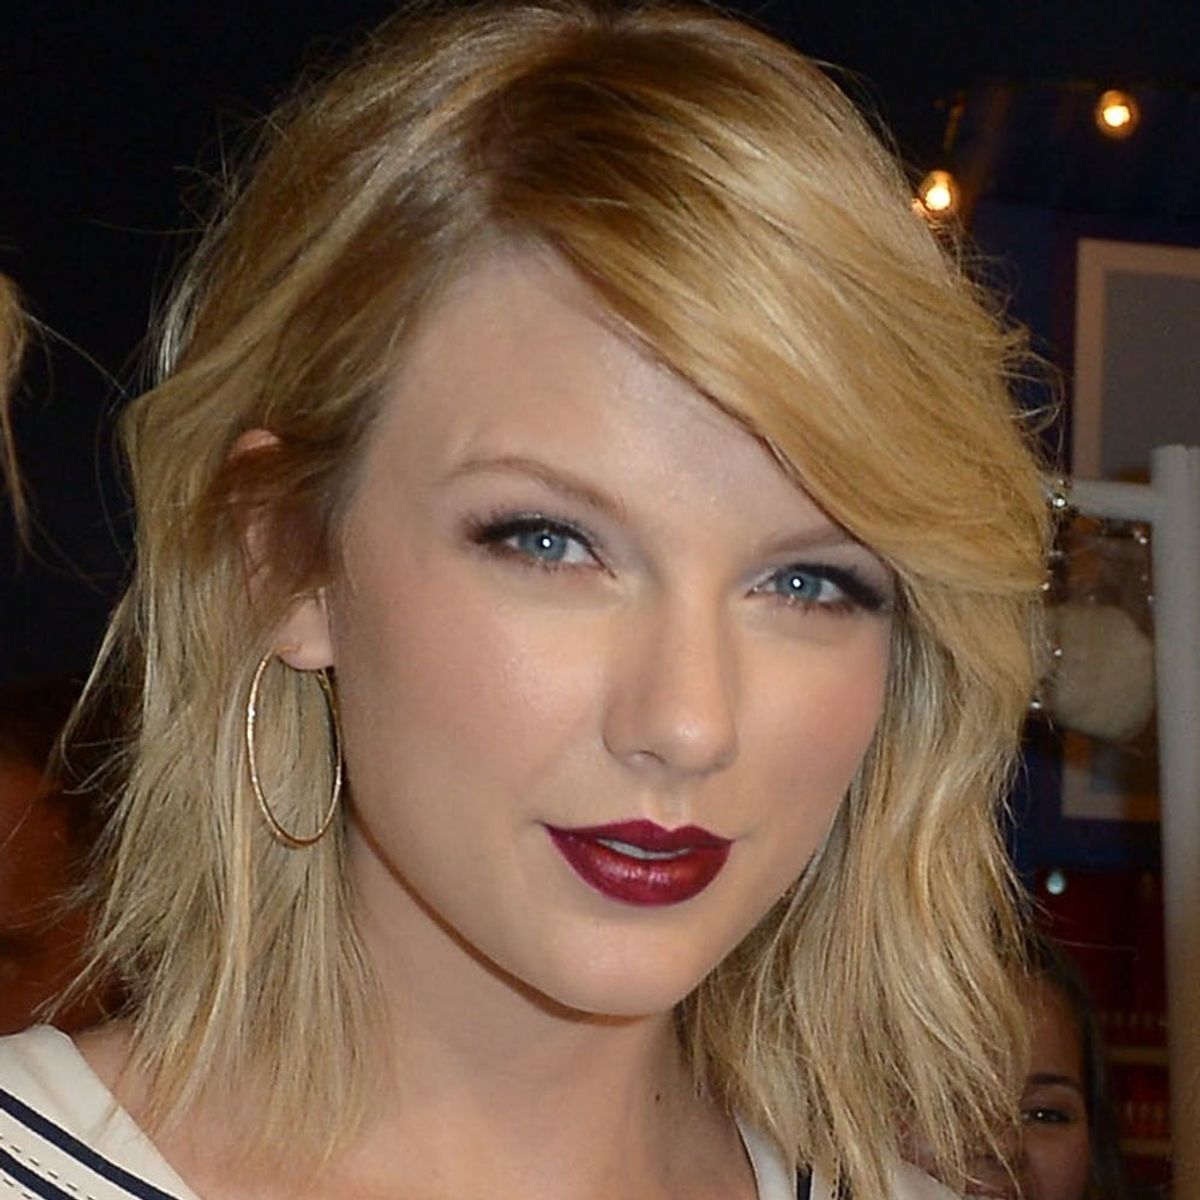 Taylor Swift Makes a Rare Appearance While Crashing Gigi and Zayn’s Date